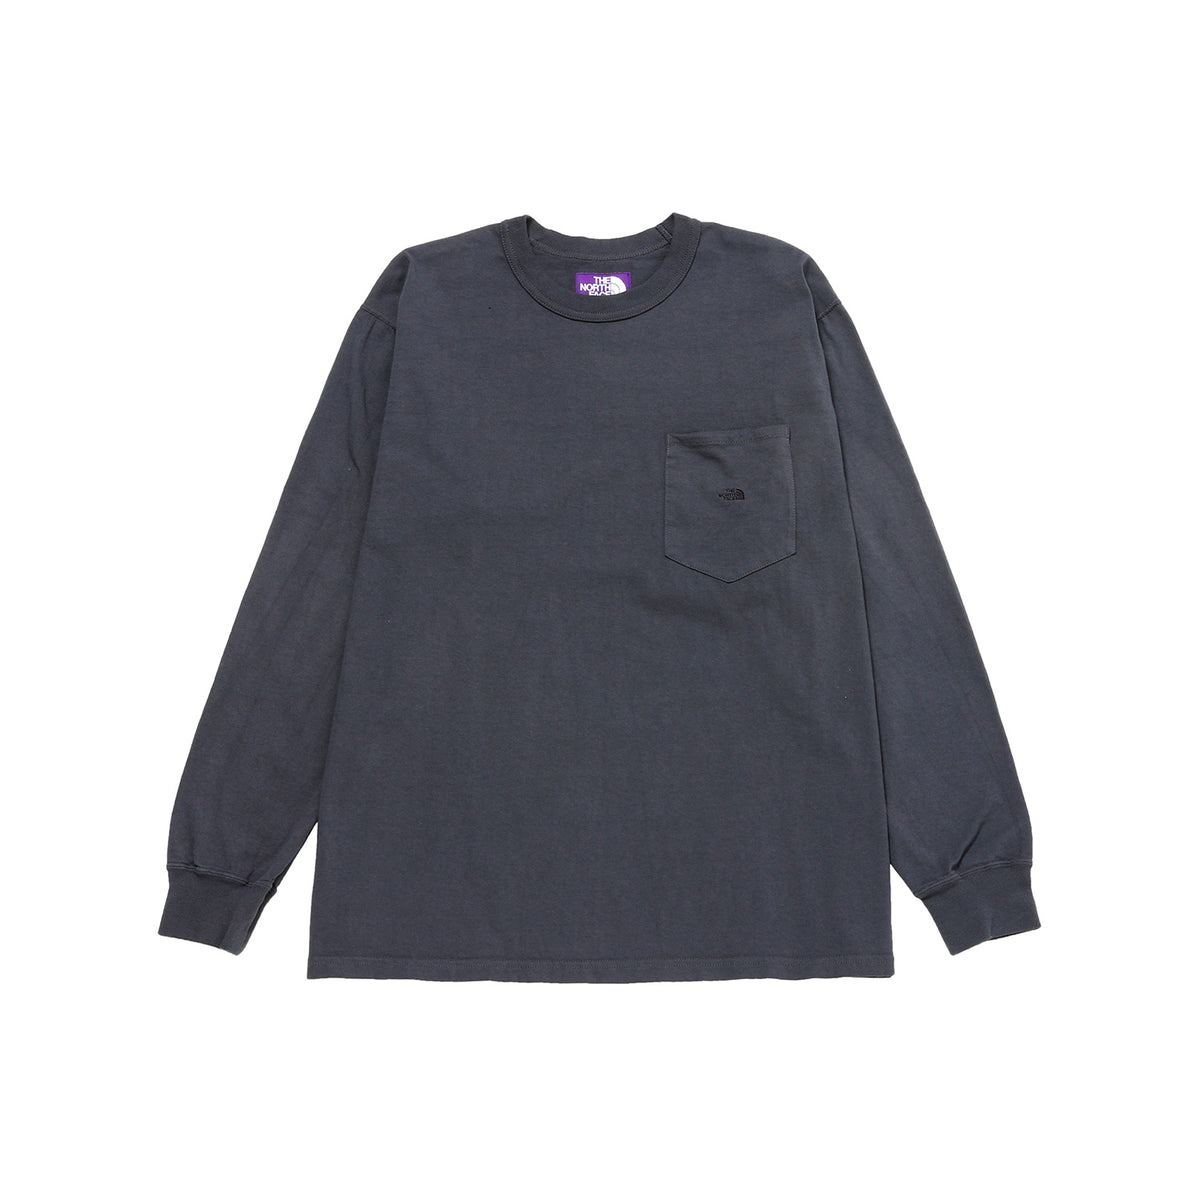 7oz Long Sleeve Pocket Tee - THE NORTH FACE PURPLE LABEL (ザ